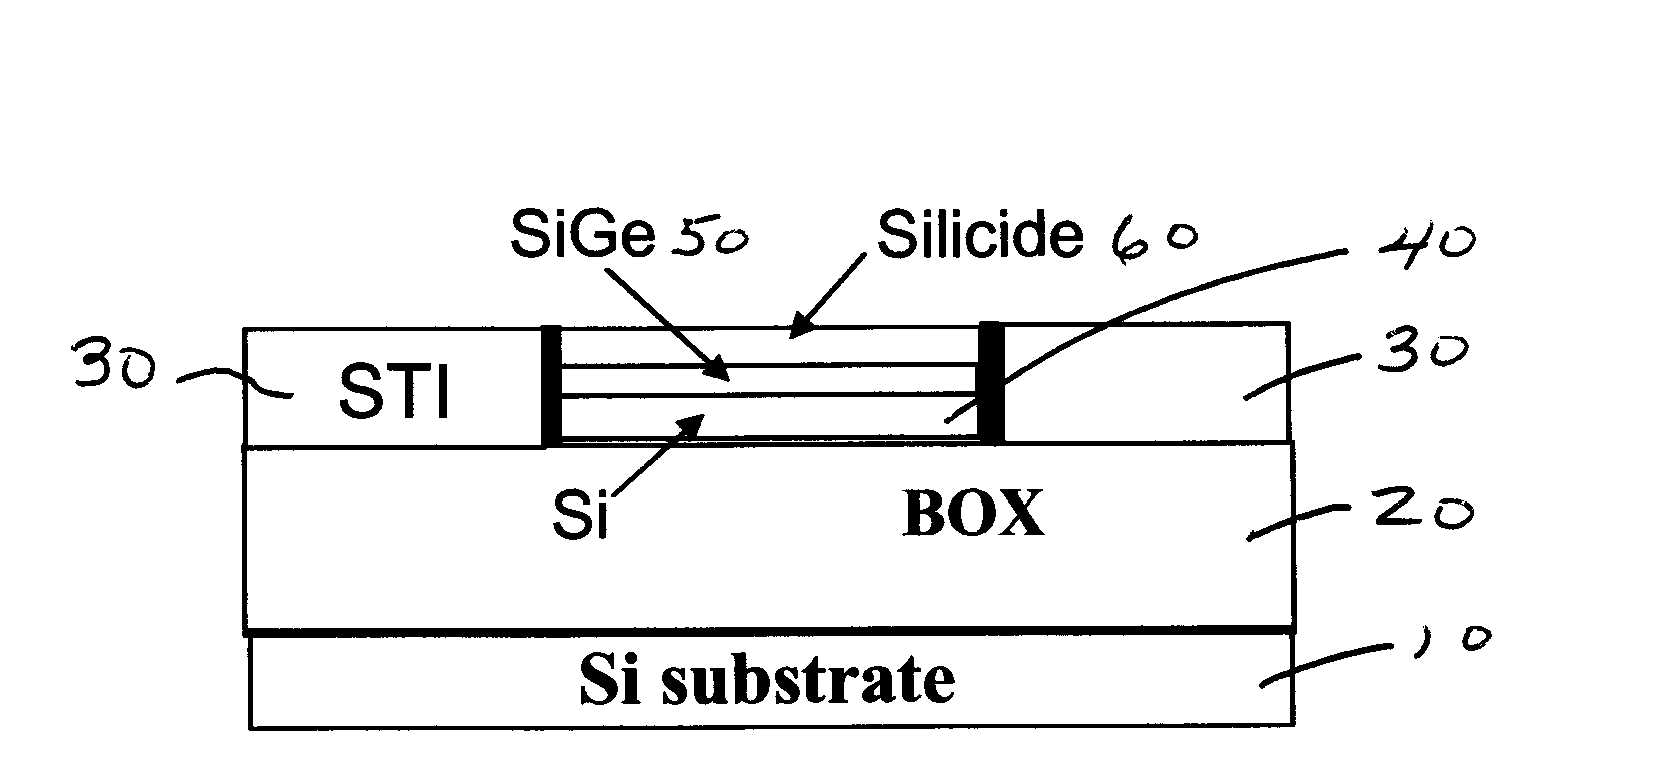 Efuse containing sige stack